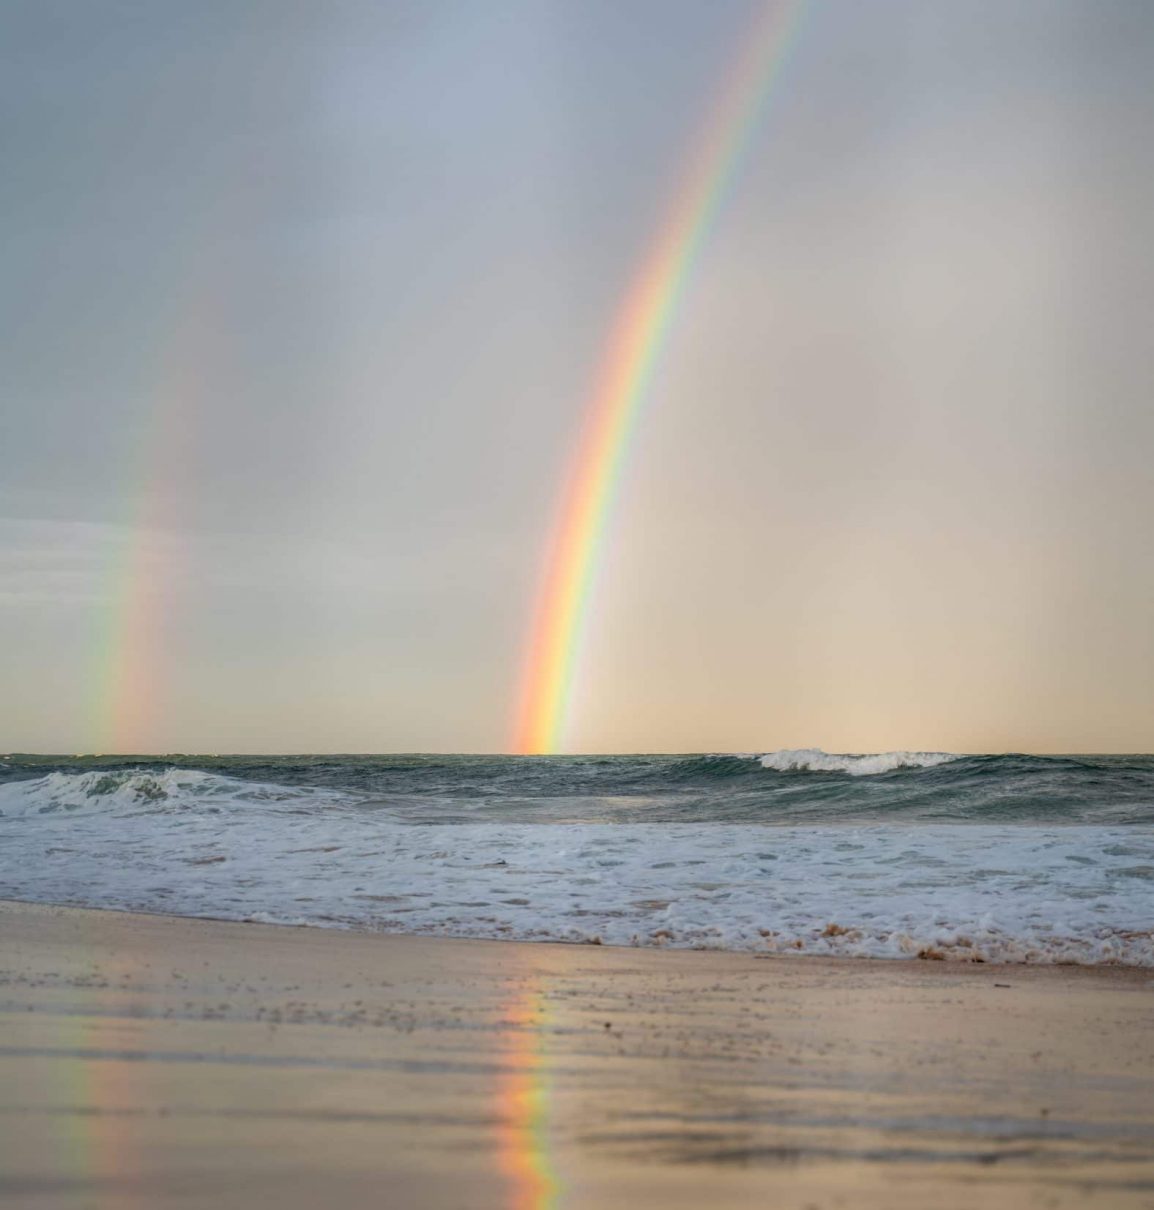 rainbow and its reflection on the beach